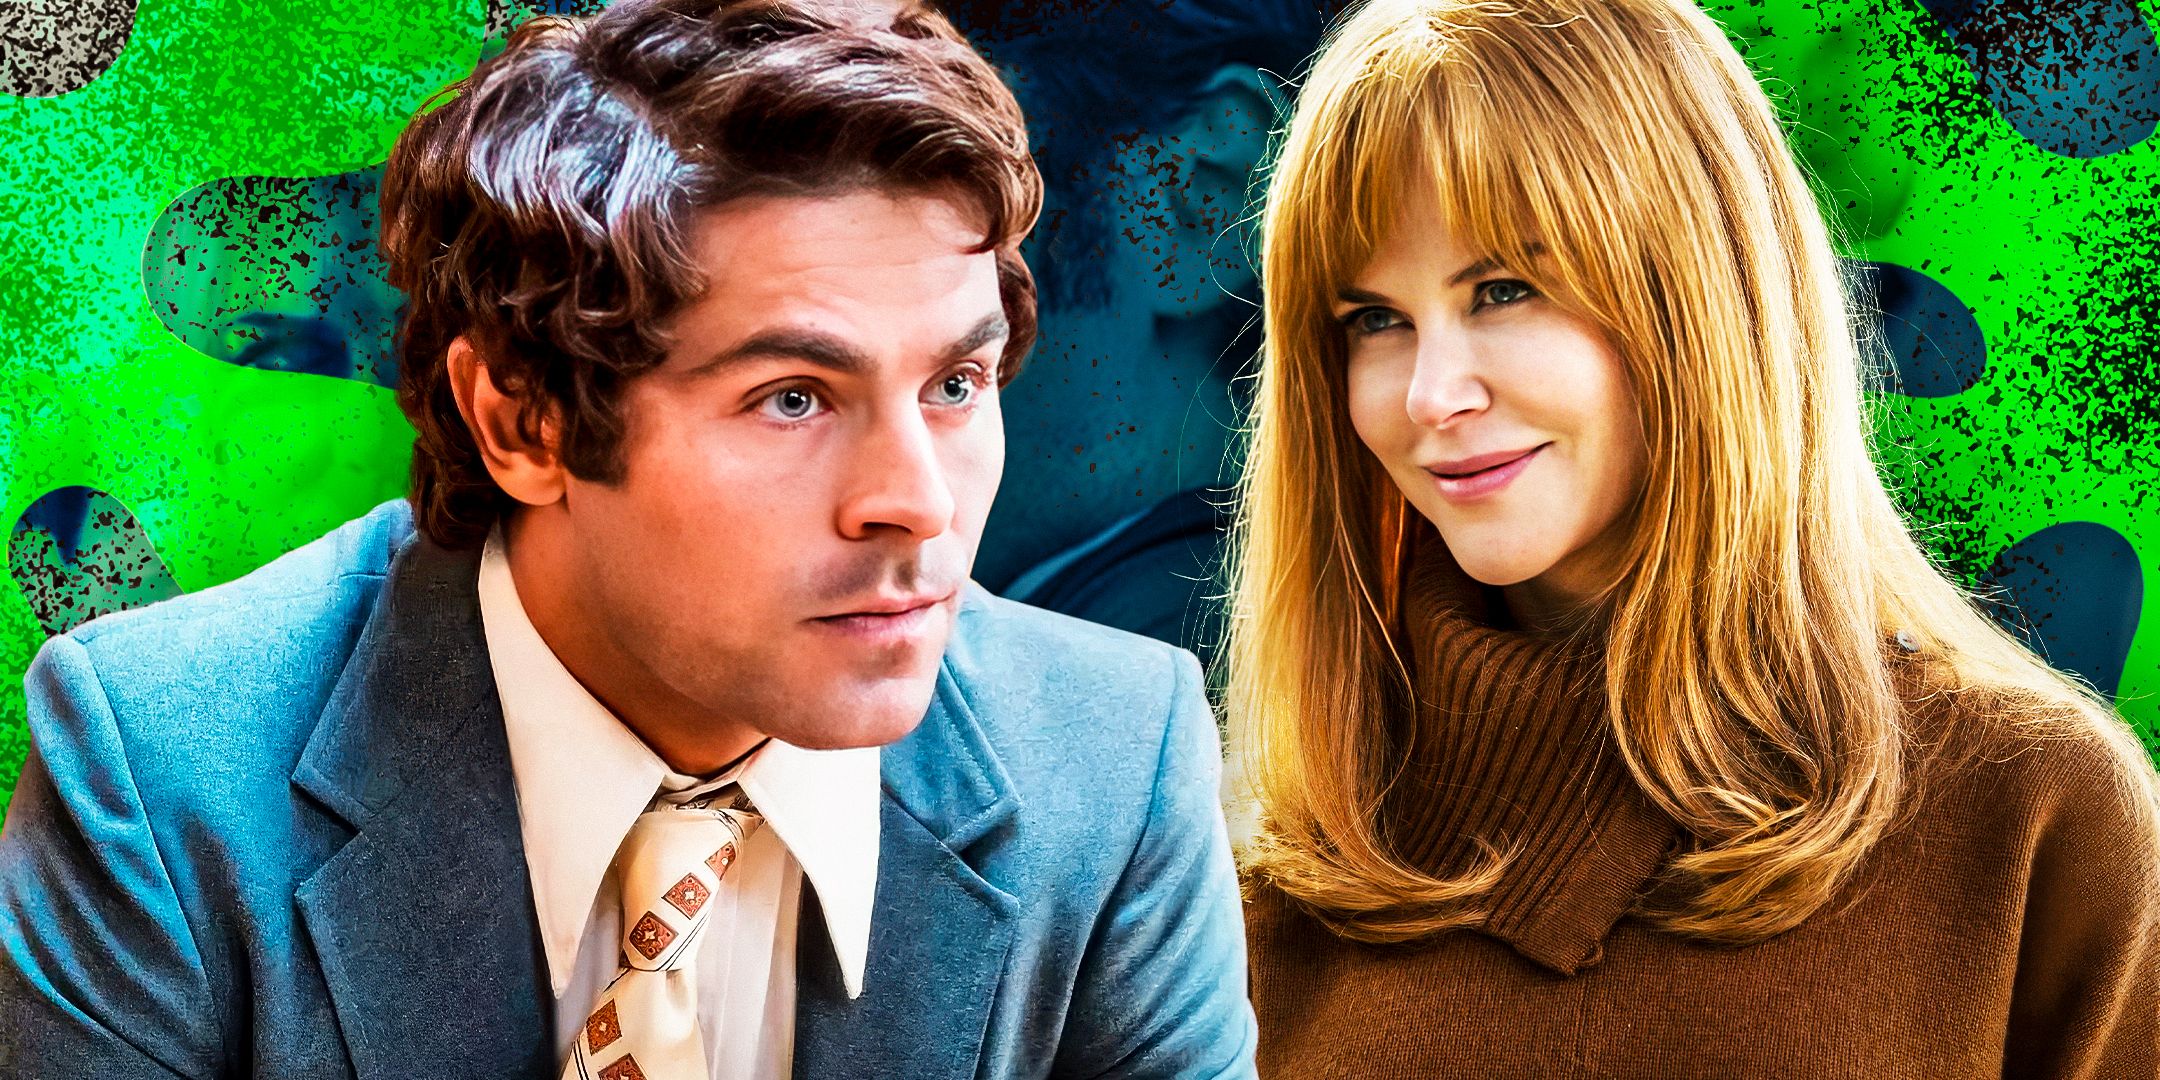 Zac Efron & Nicole Kidman's New Movie Can Make Up For 45% Rotten Tomatoes Flop From 12 Years Ago